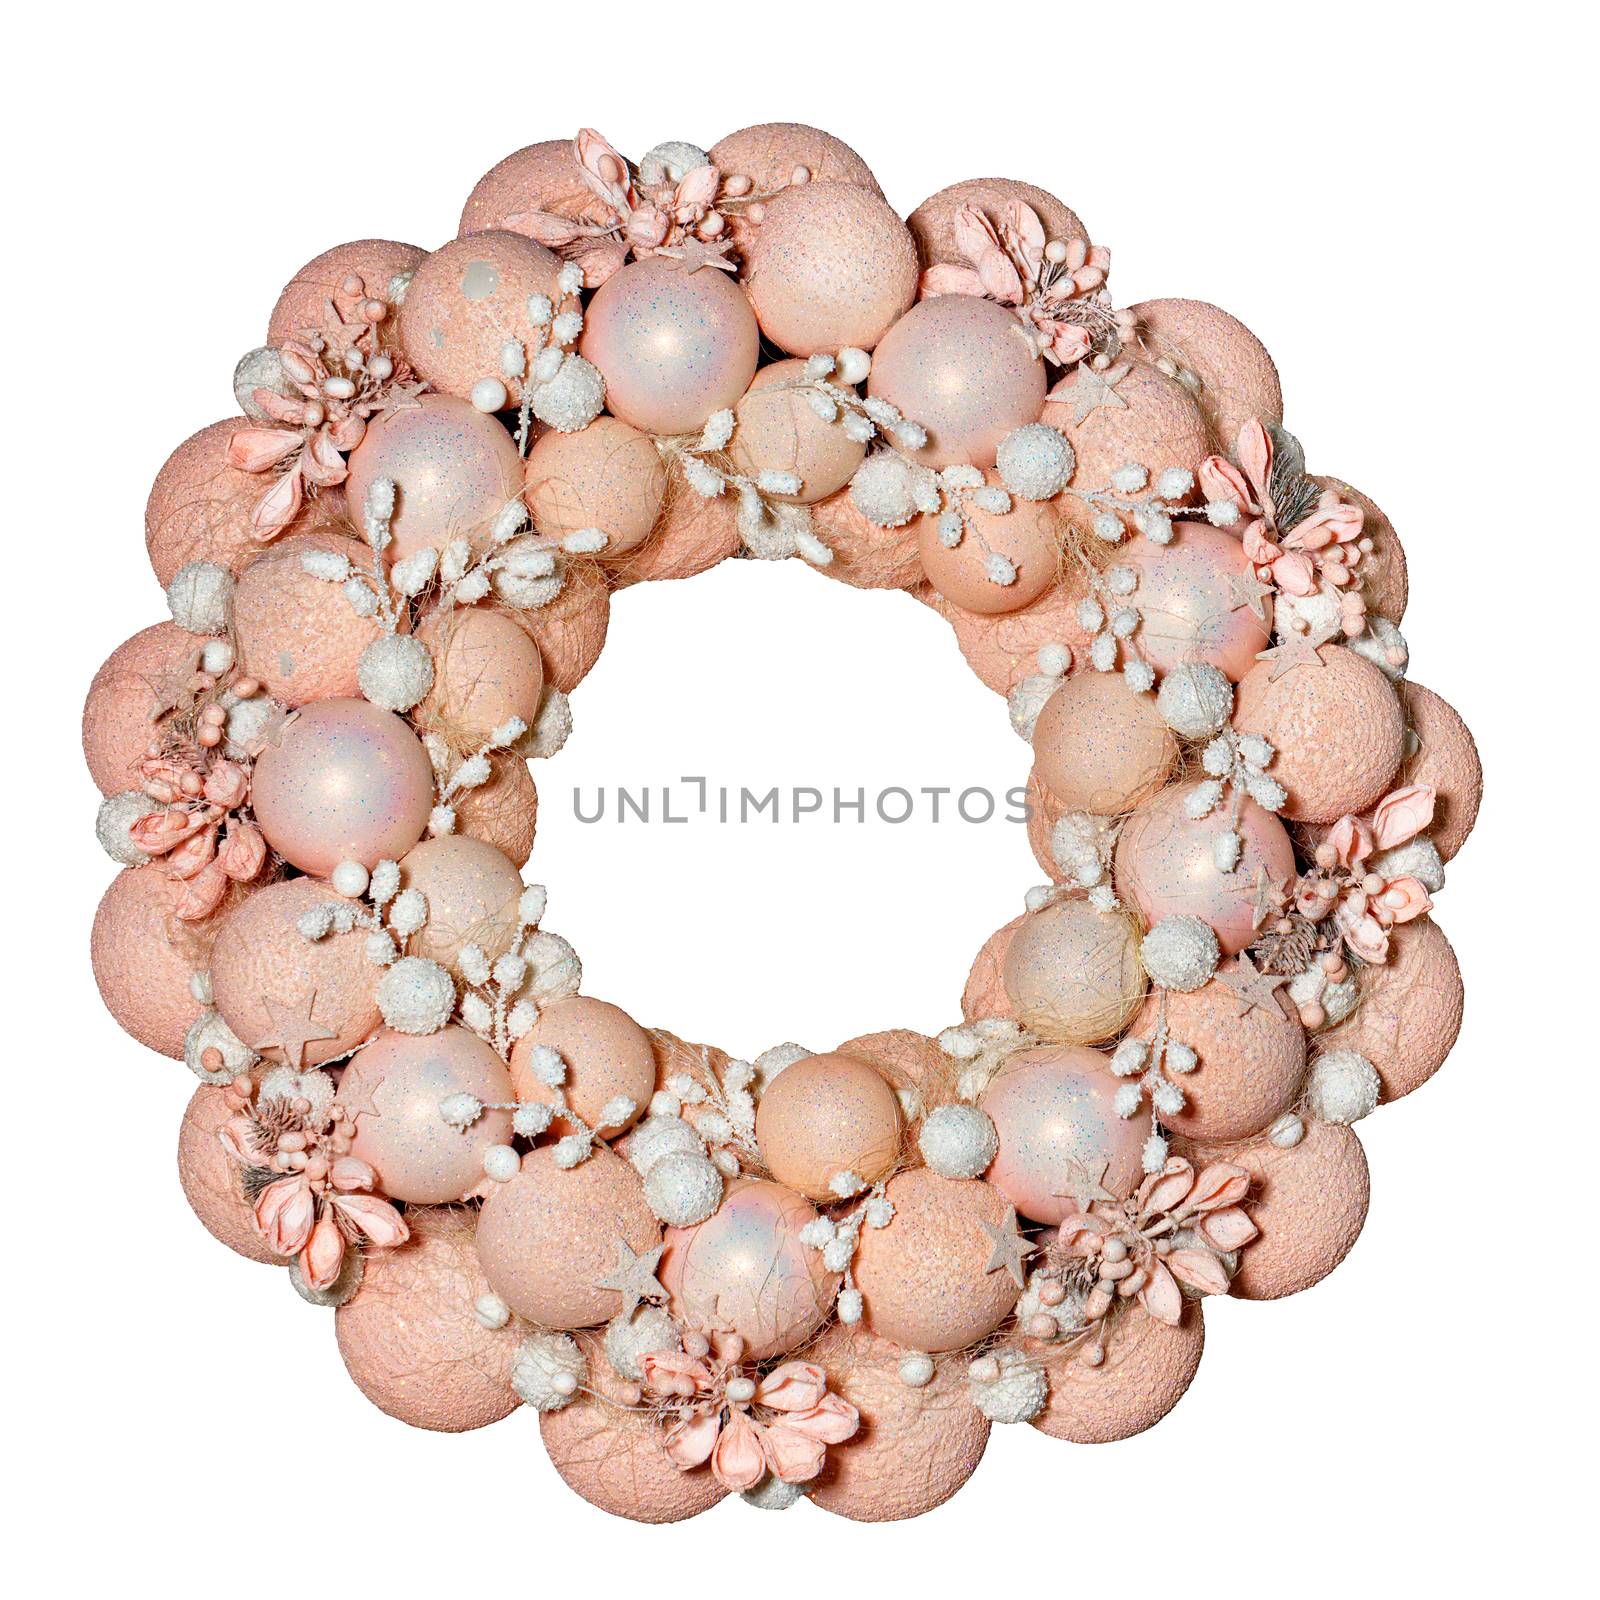 Christmas wreath with decorative balls, flowers and stars in pink and beige pastel colors. Christmas greeting illustration. The image is isolated on a white background.